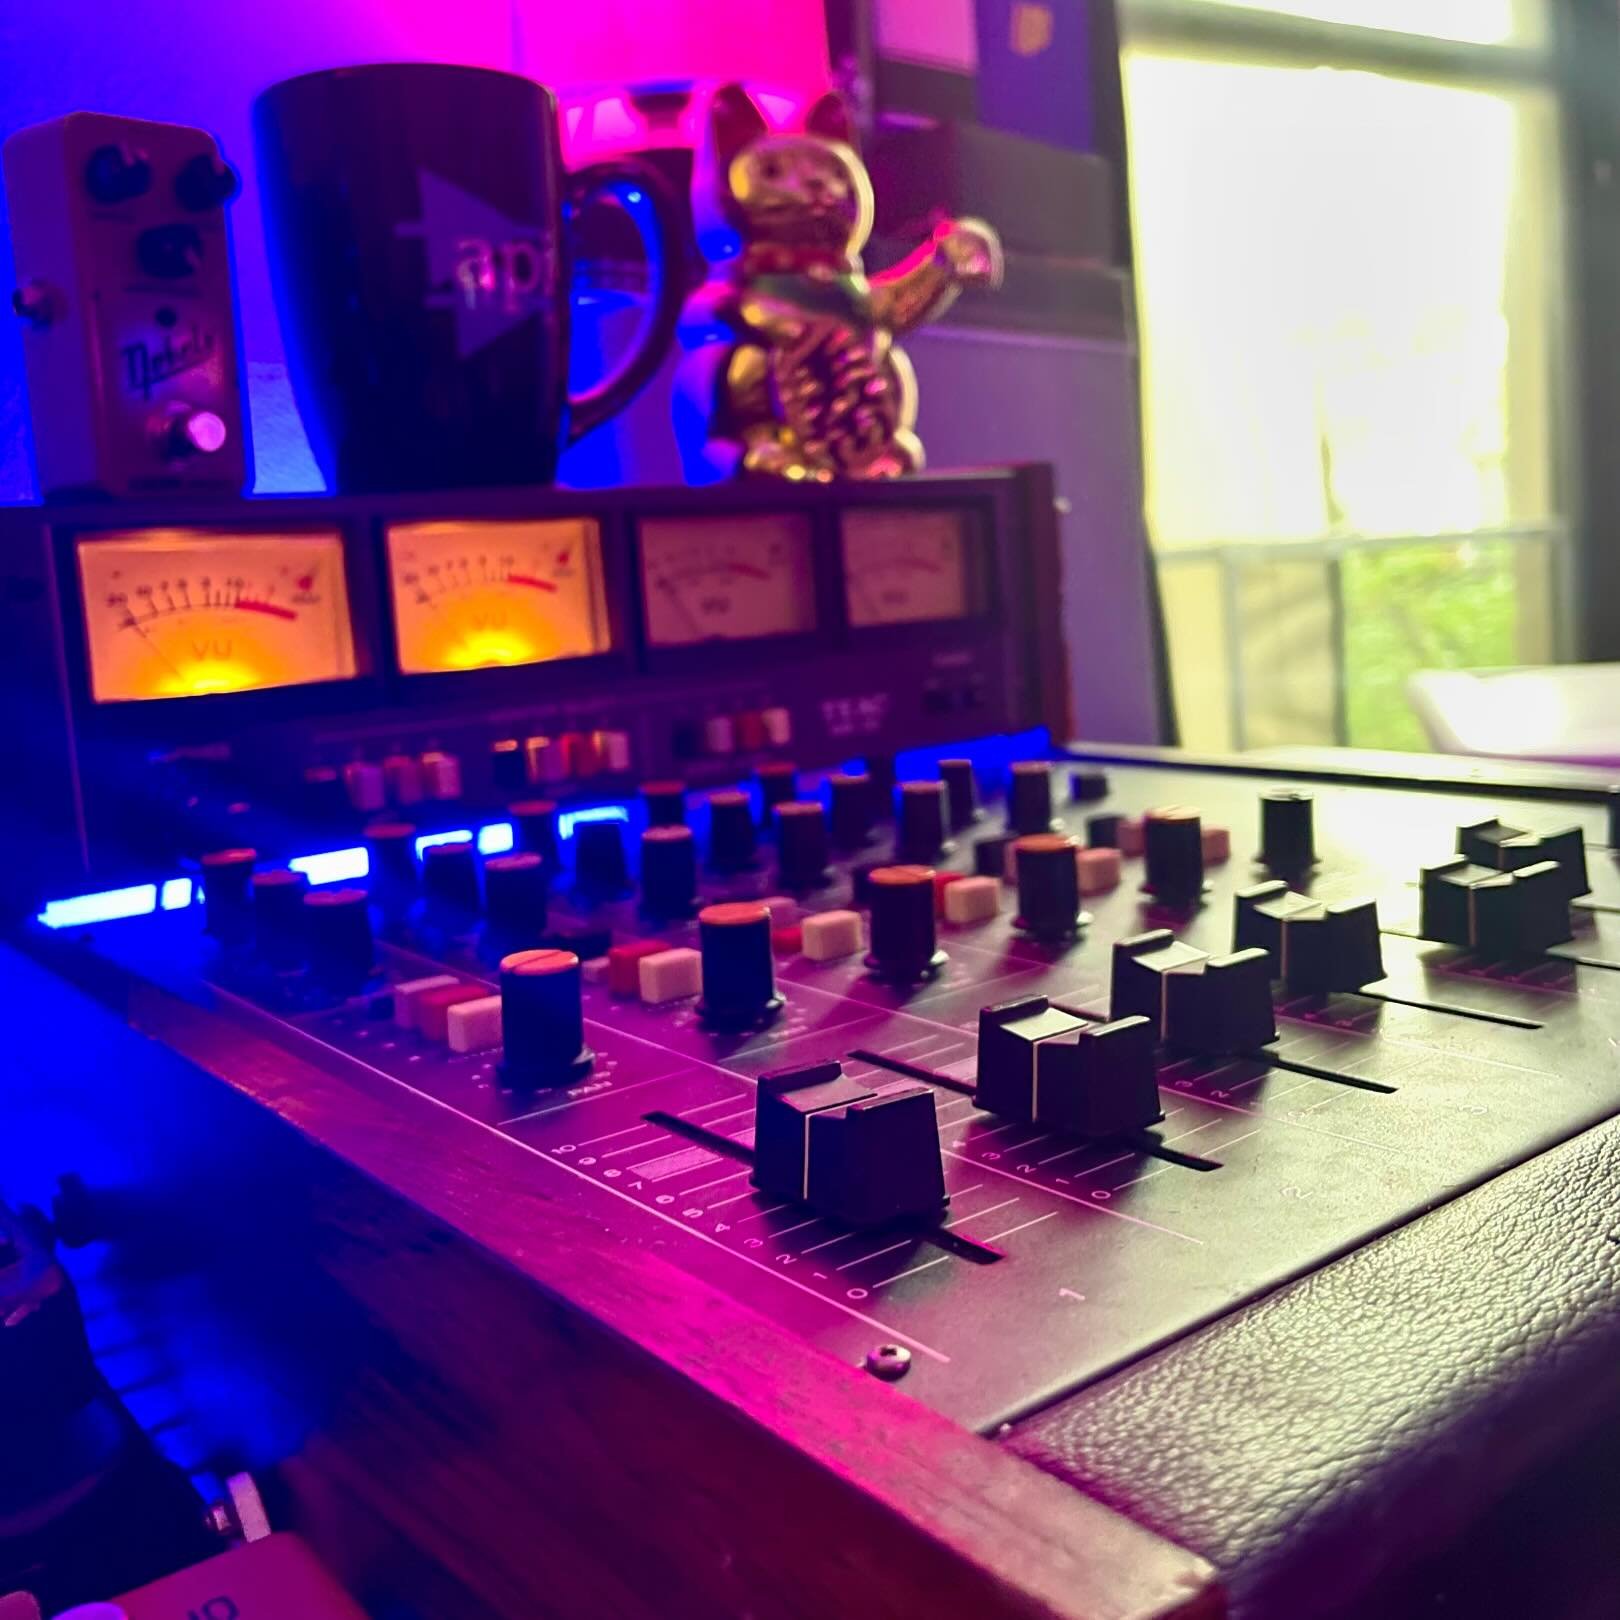 I love running drums, bass &amp; guitars through this old Teac mixer for some saturation in a mix. It sounds great!🎚️🎚️🎚️
.
.
.
#mix #analog #mixingboard #saturation #production #audioengineer #recordproducer #musician #homestudio #recordingstudio